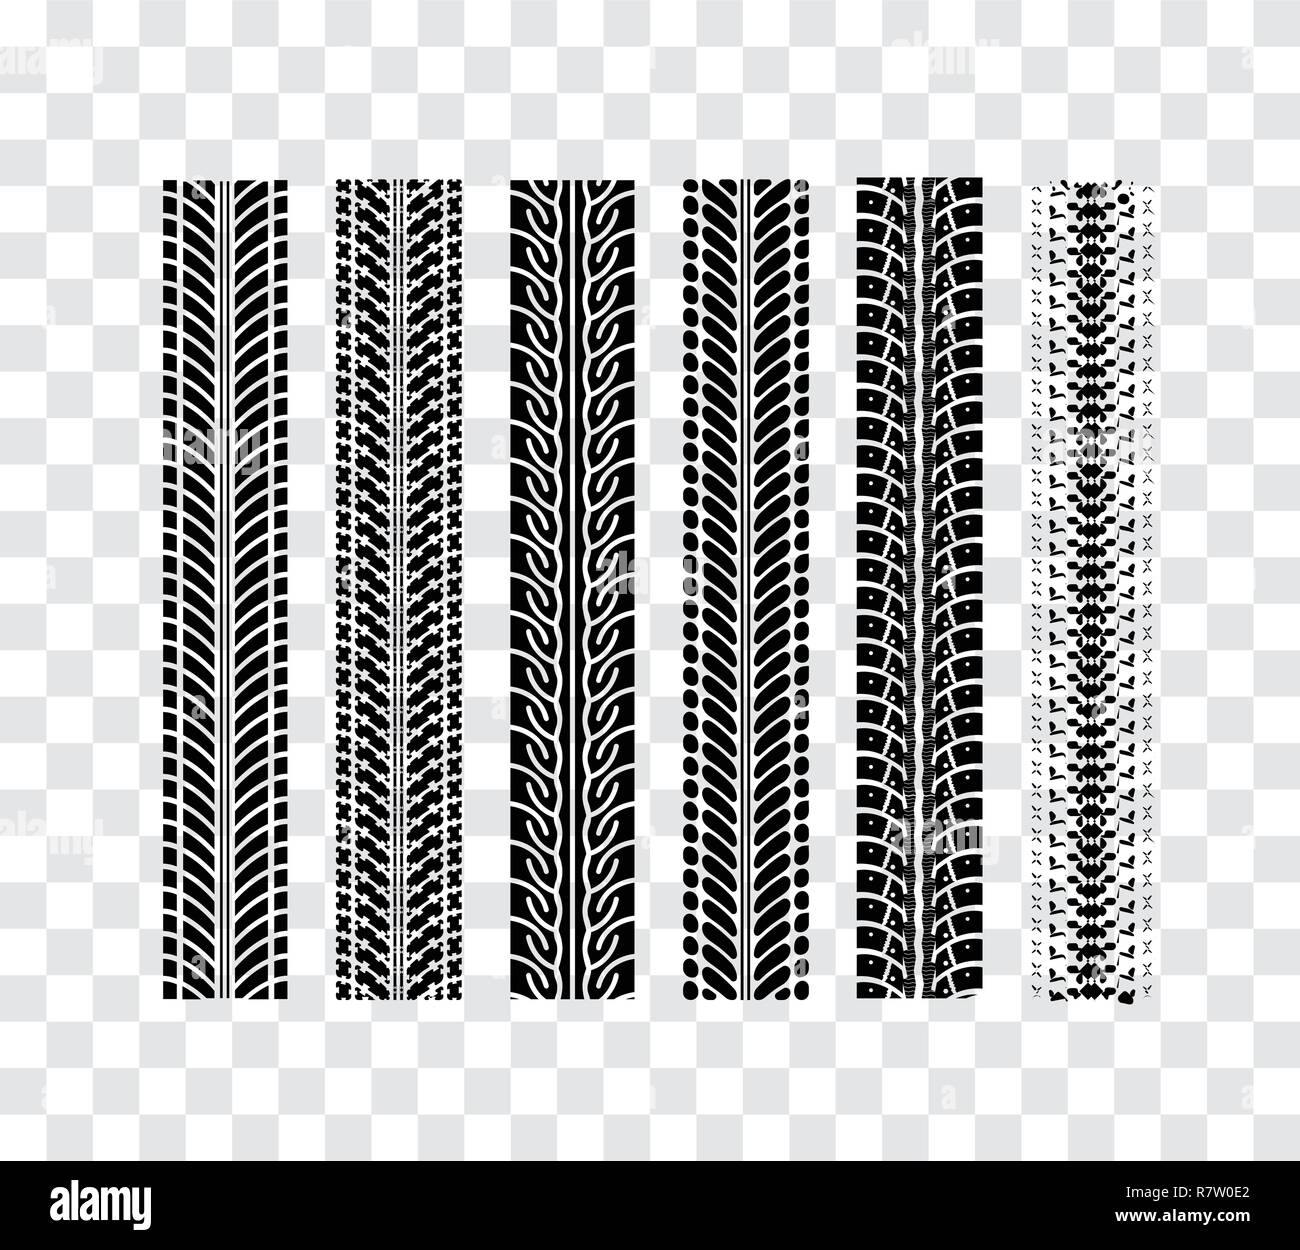 Tire tracks collection. Vector illustration on checkered background Stock Vector